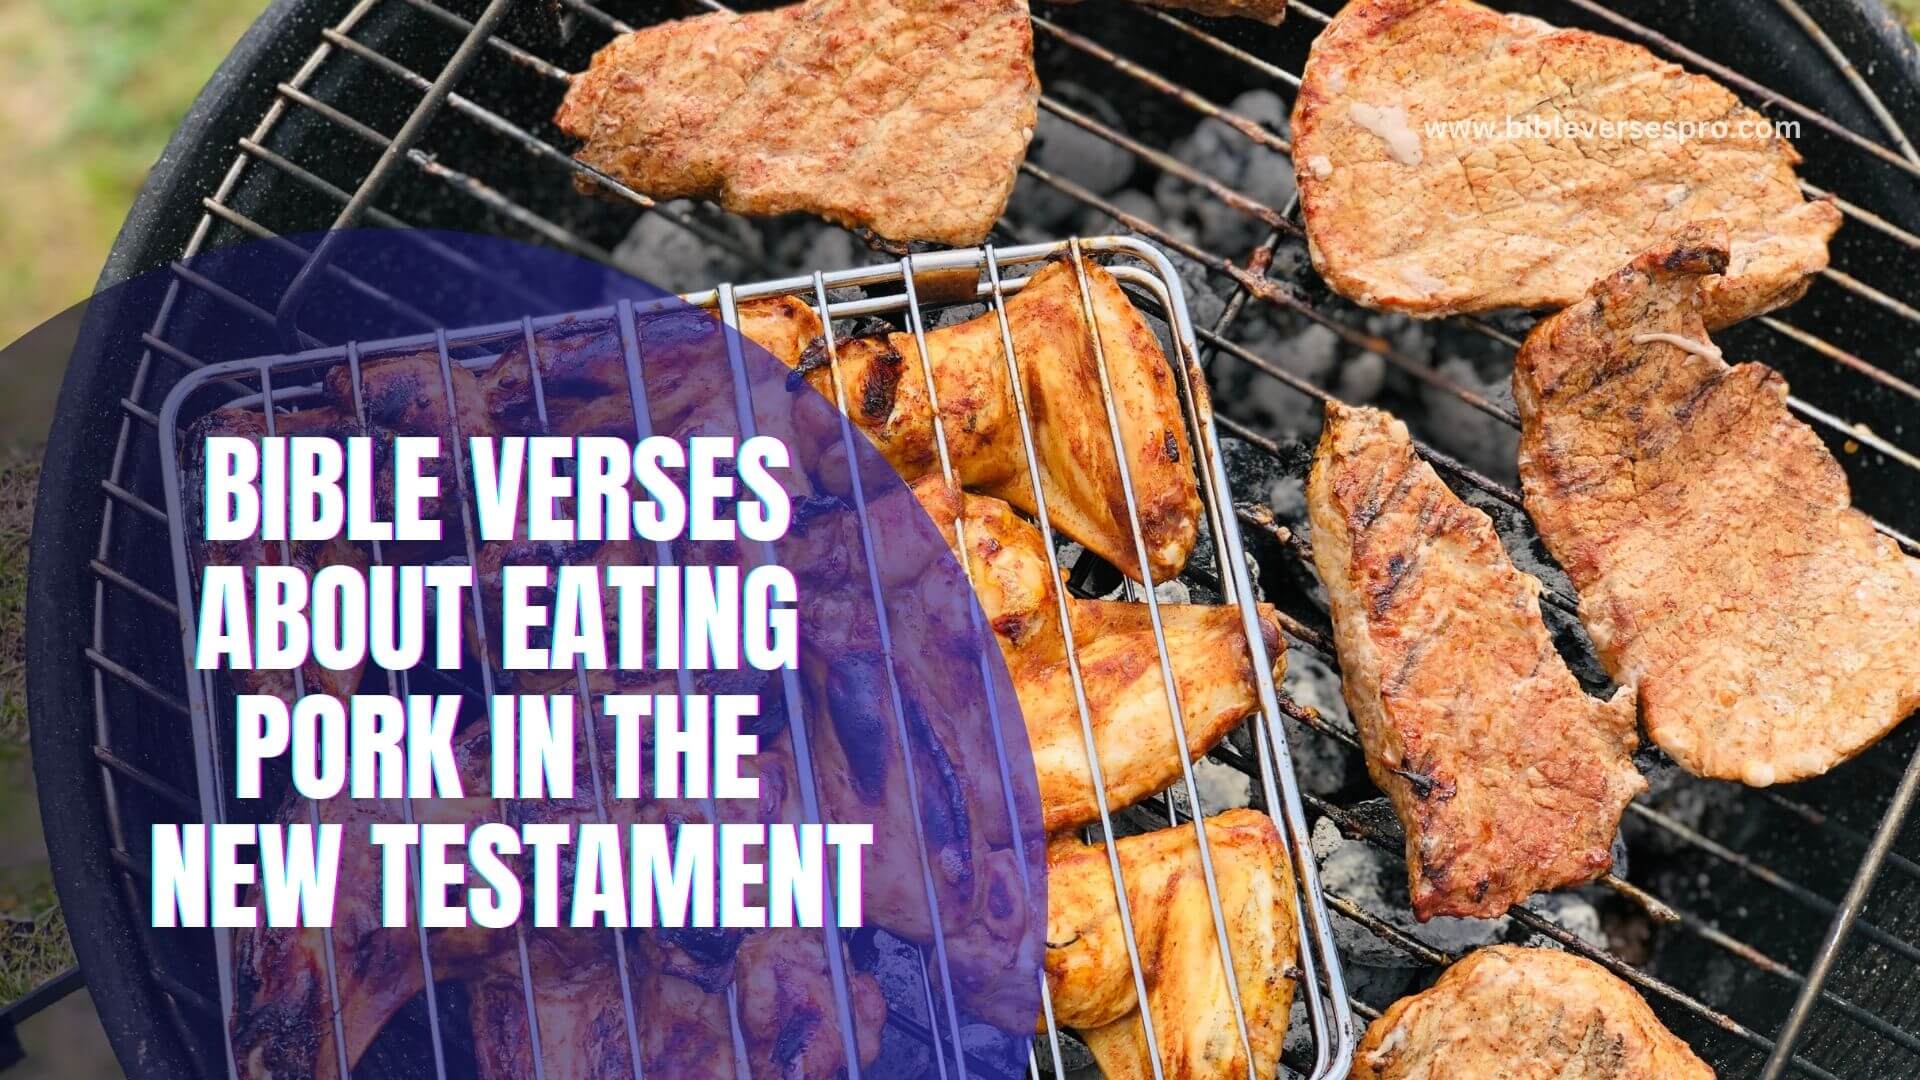 BIBLE VERSES ABOUT EATING PORK IN THE NEW TESTAMENT (1)